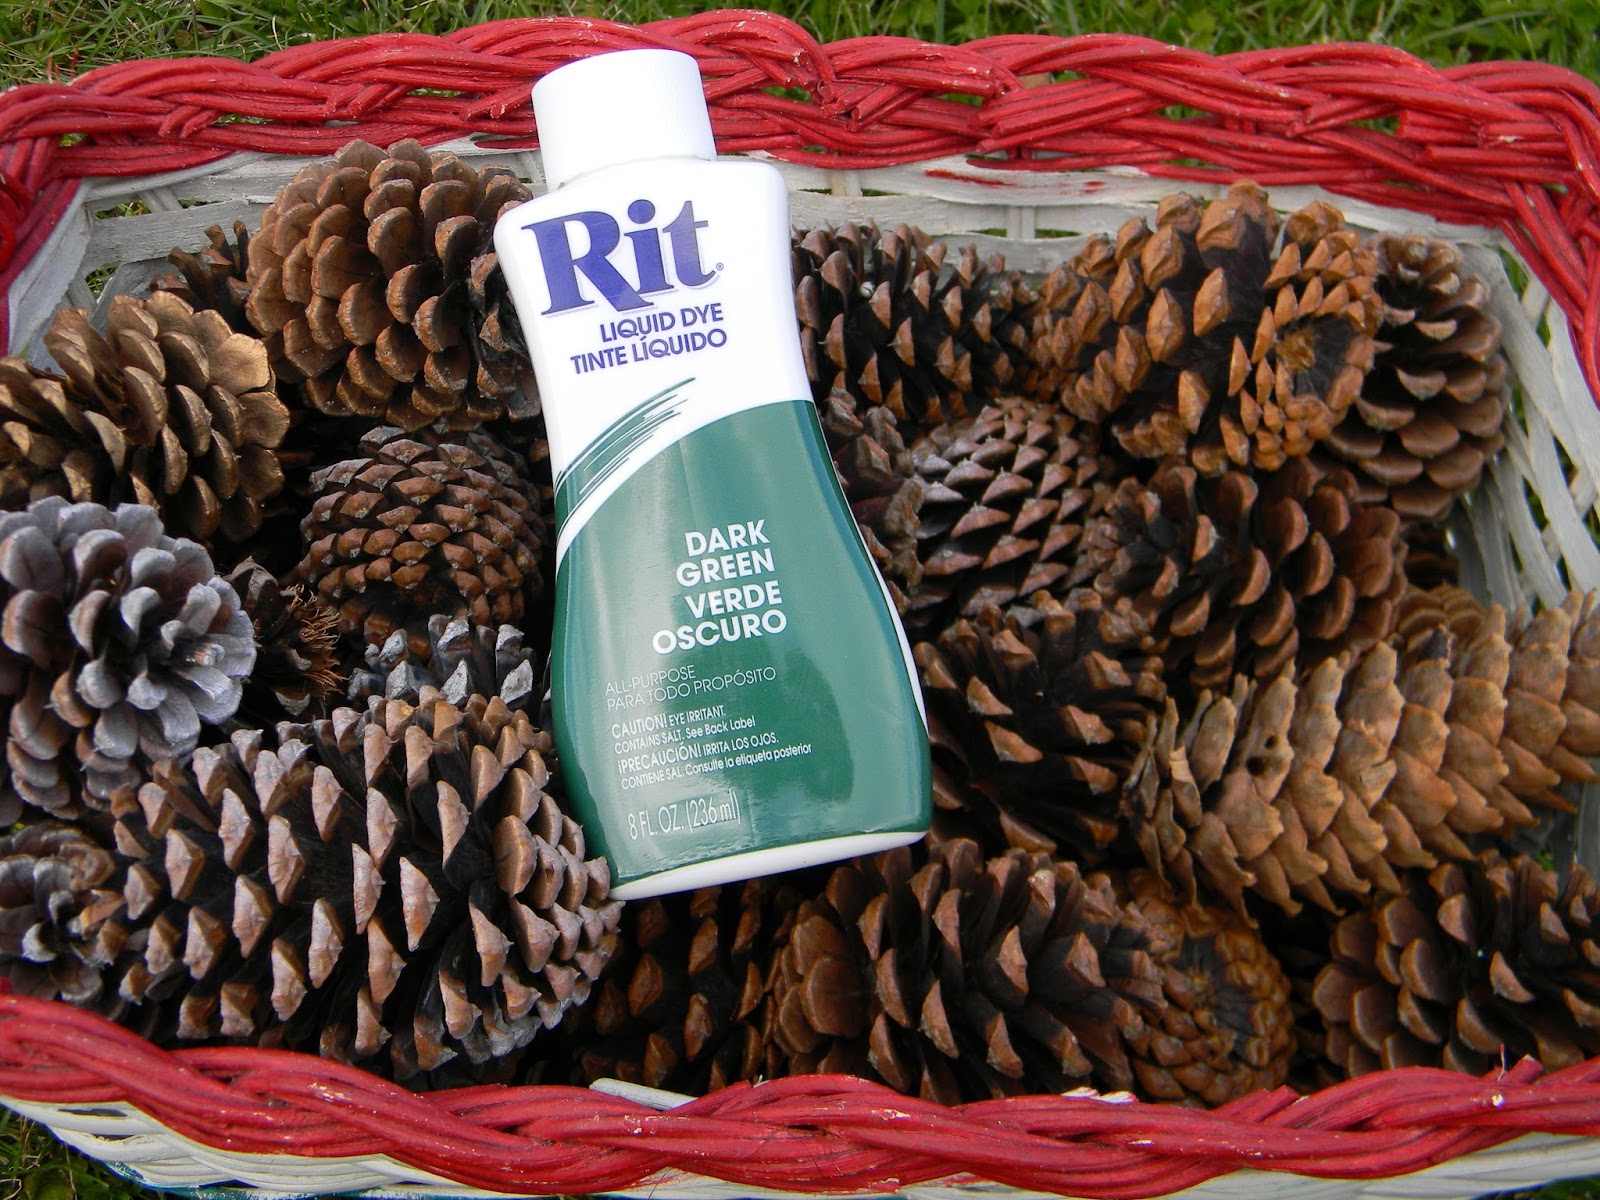 Artistic Endeavors 101: Dyeing Pine Cones with RIT Dye